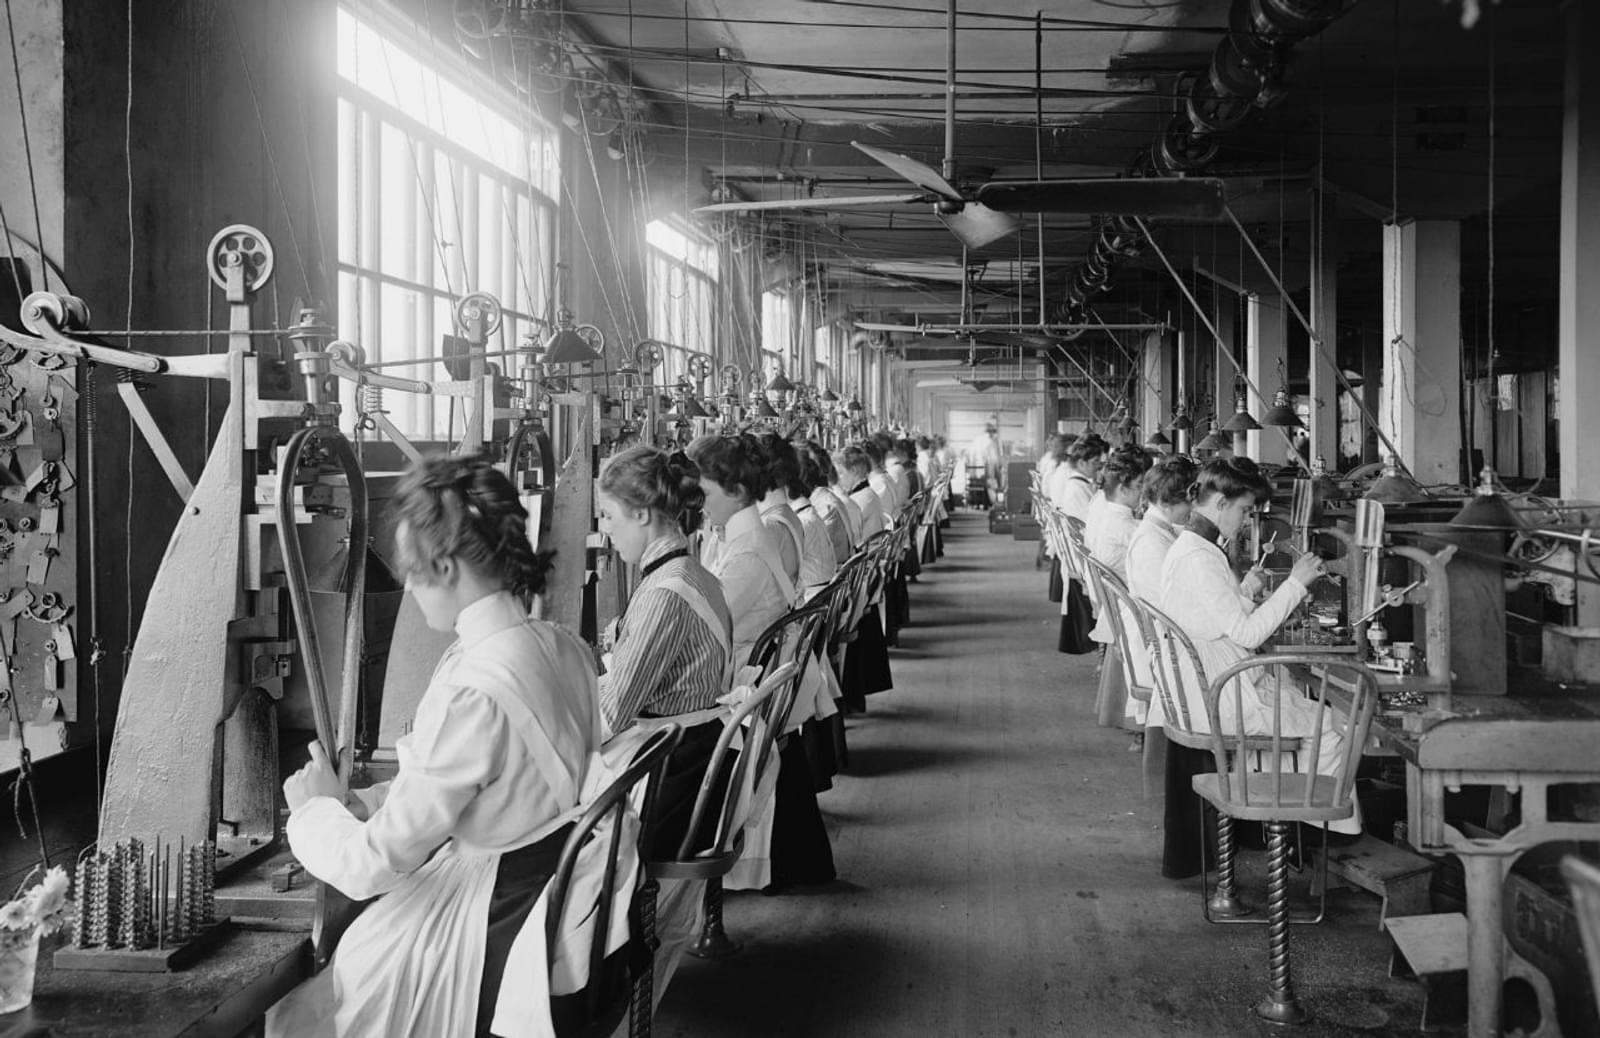 Vintage image of women in workshop assembly line sewing on antique machines